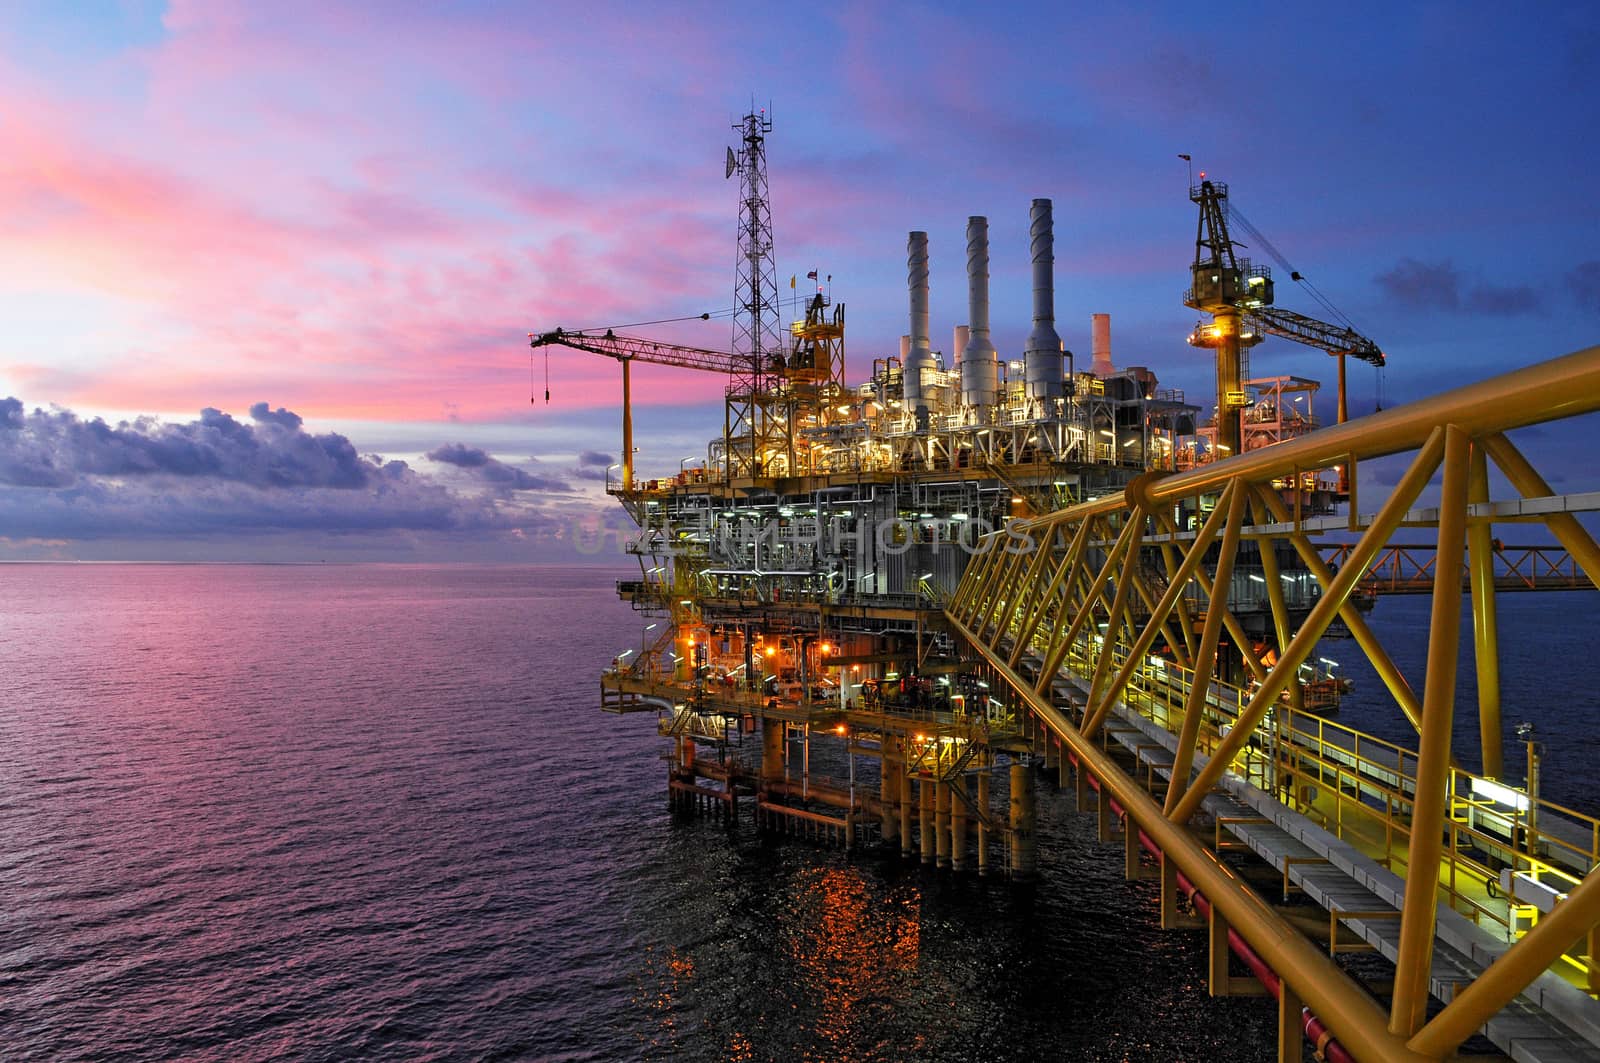 offshore rig in twilight by think4photop